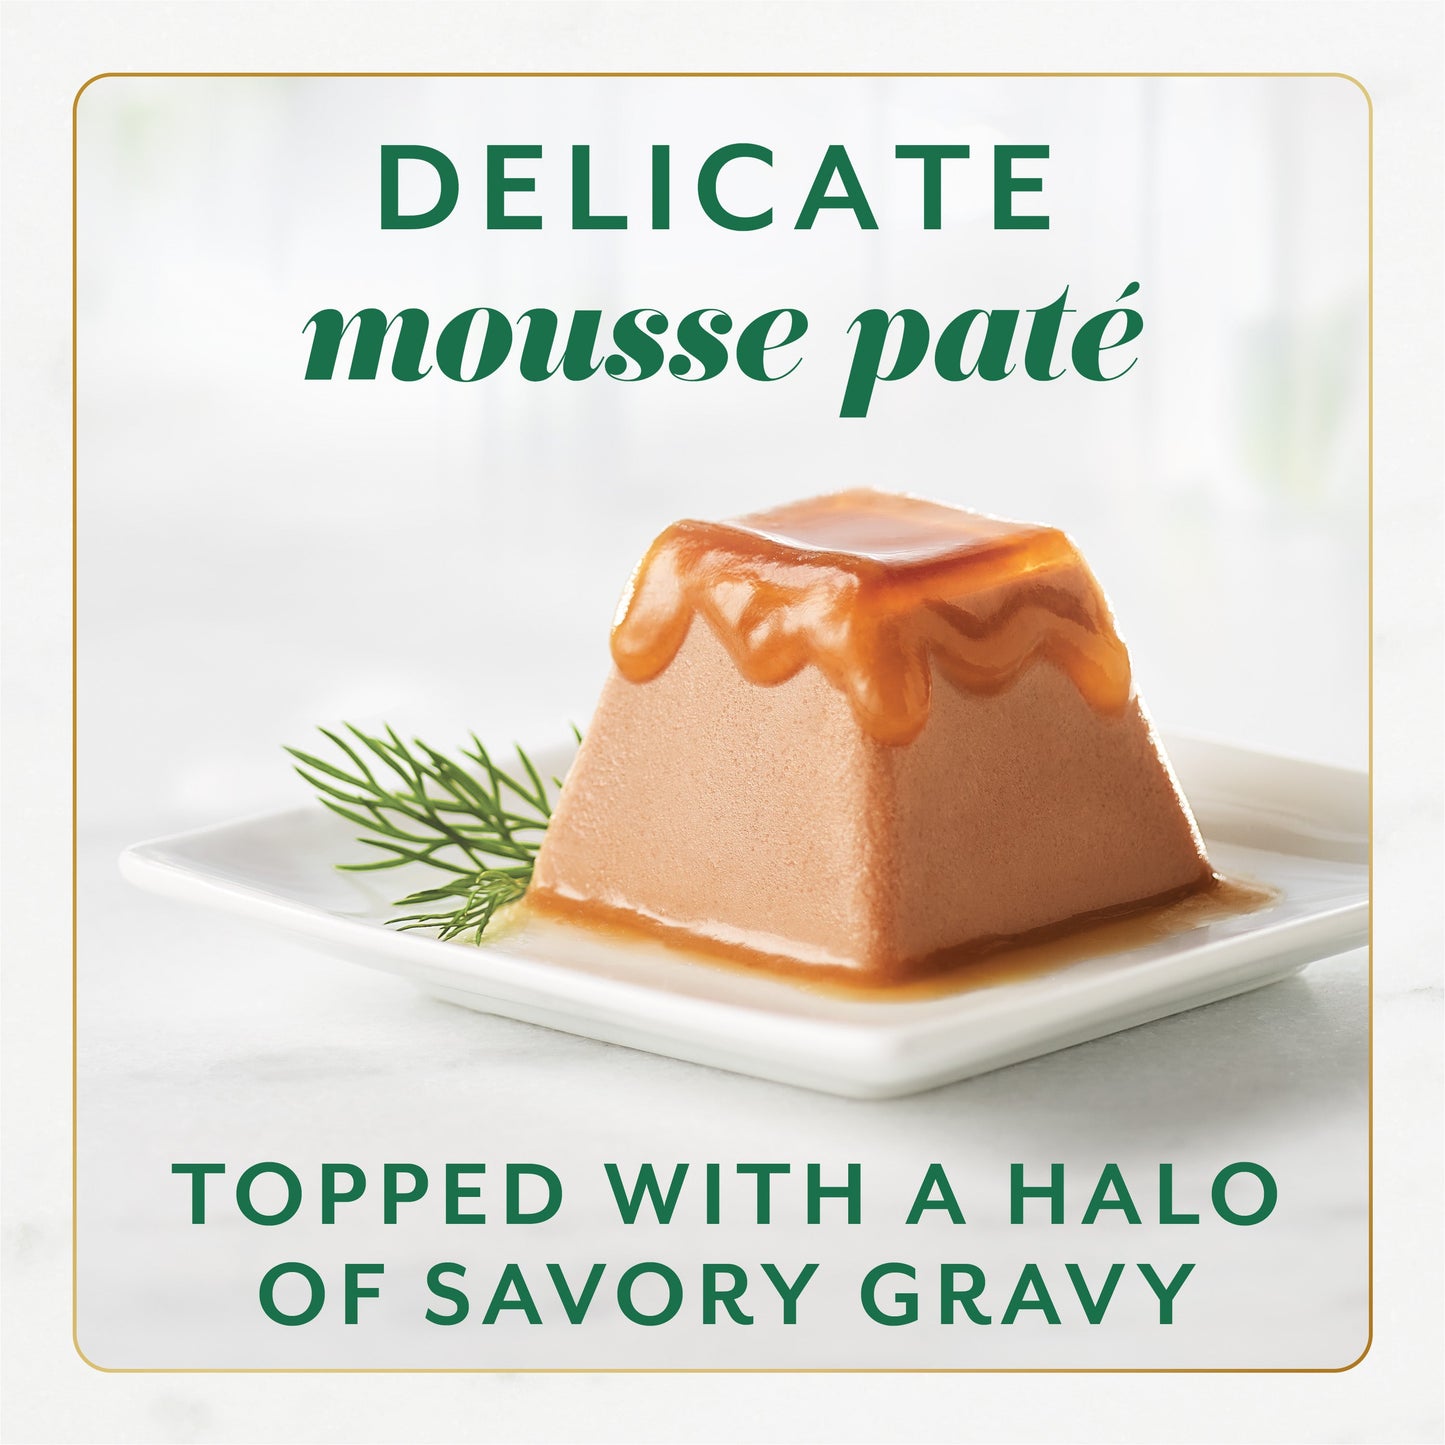 Delicate Chicken Mousse Pate topped with a halo of savory gravy